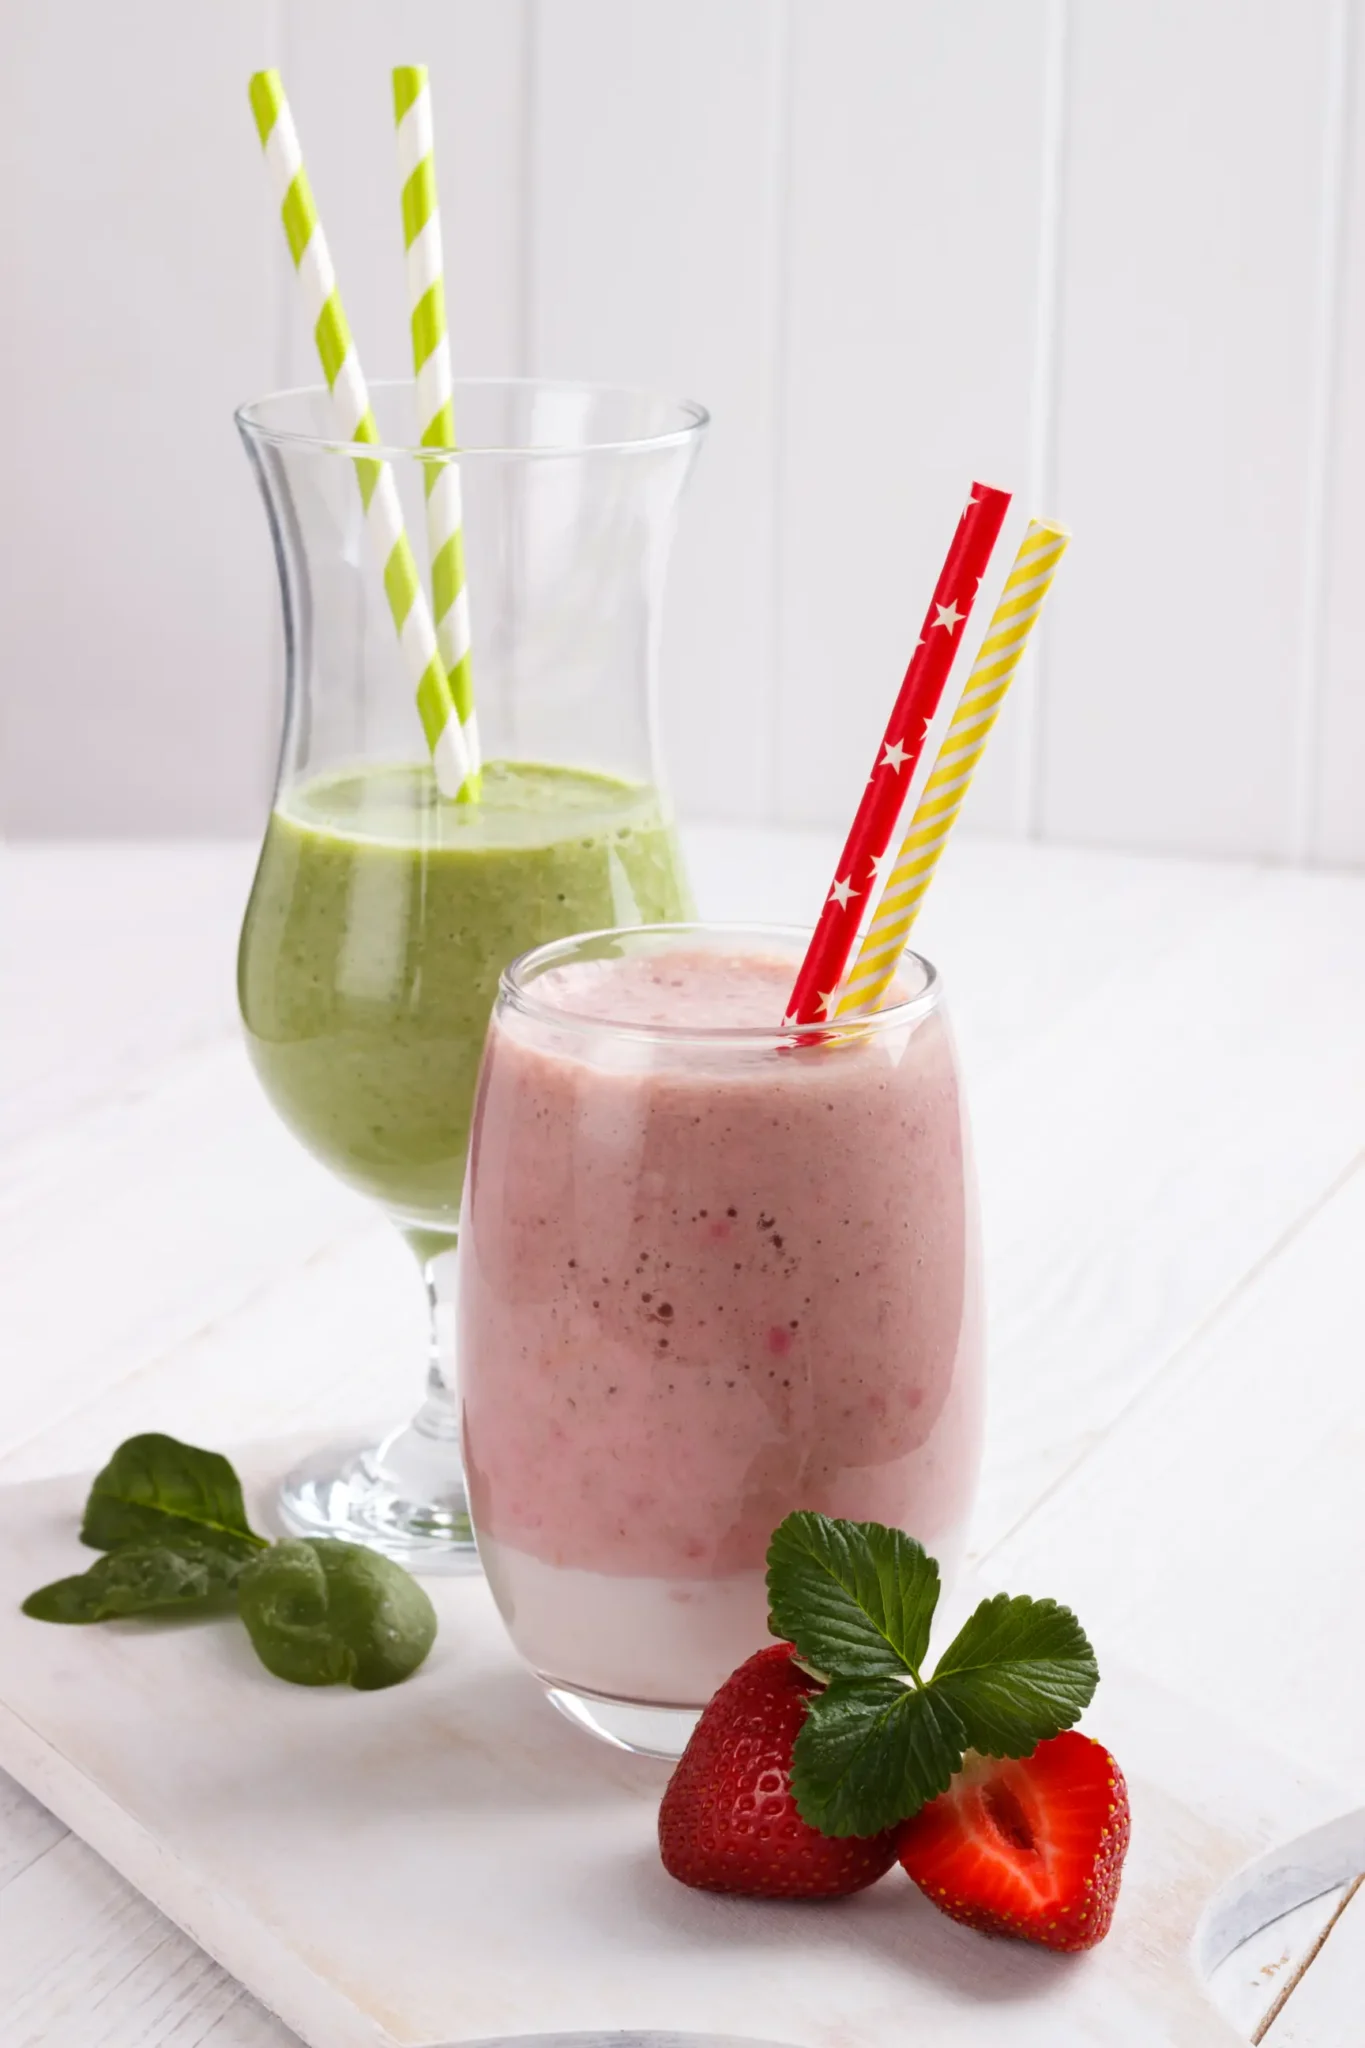 ricetta per dimagrire in menopausa Smoothie alle fragole e spinaci